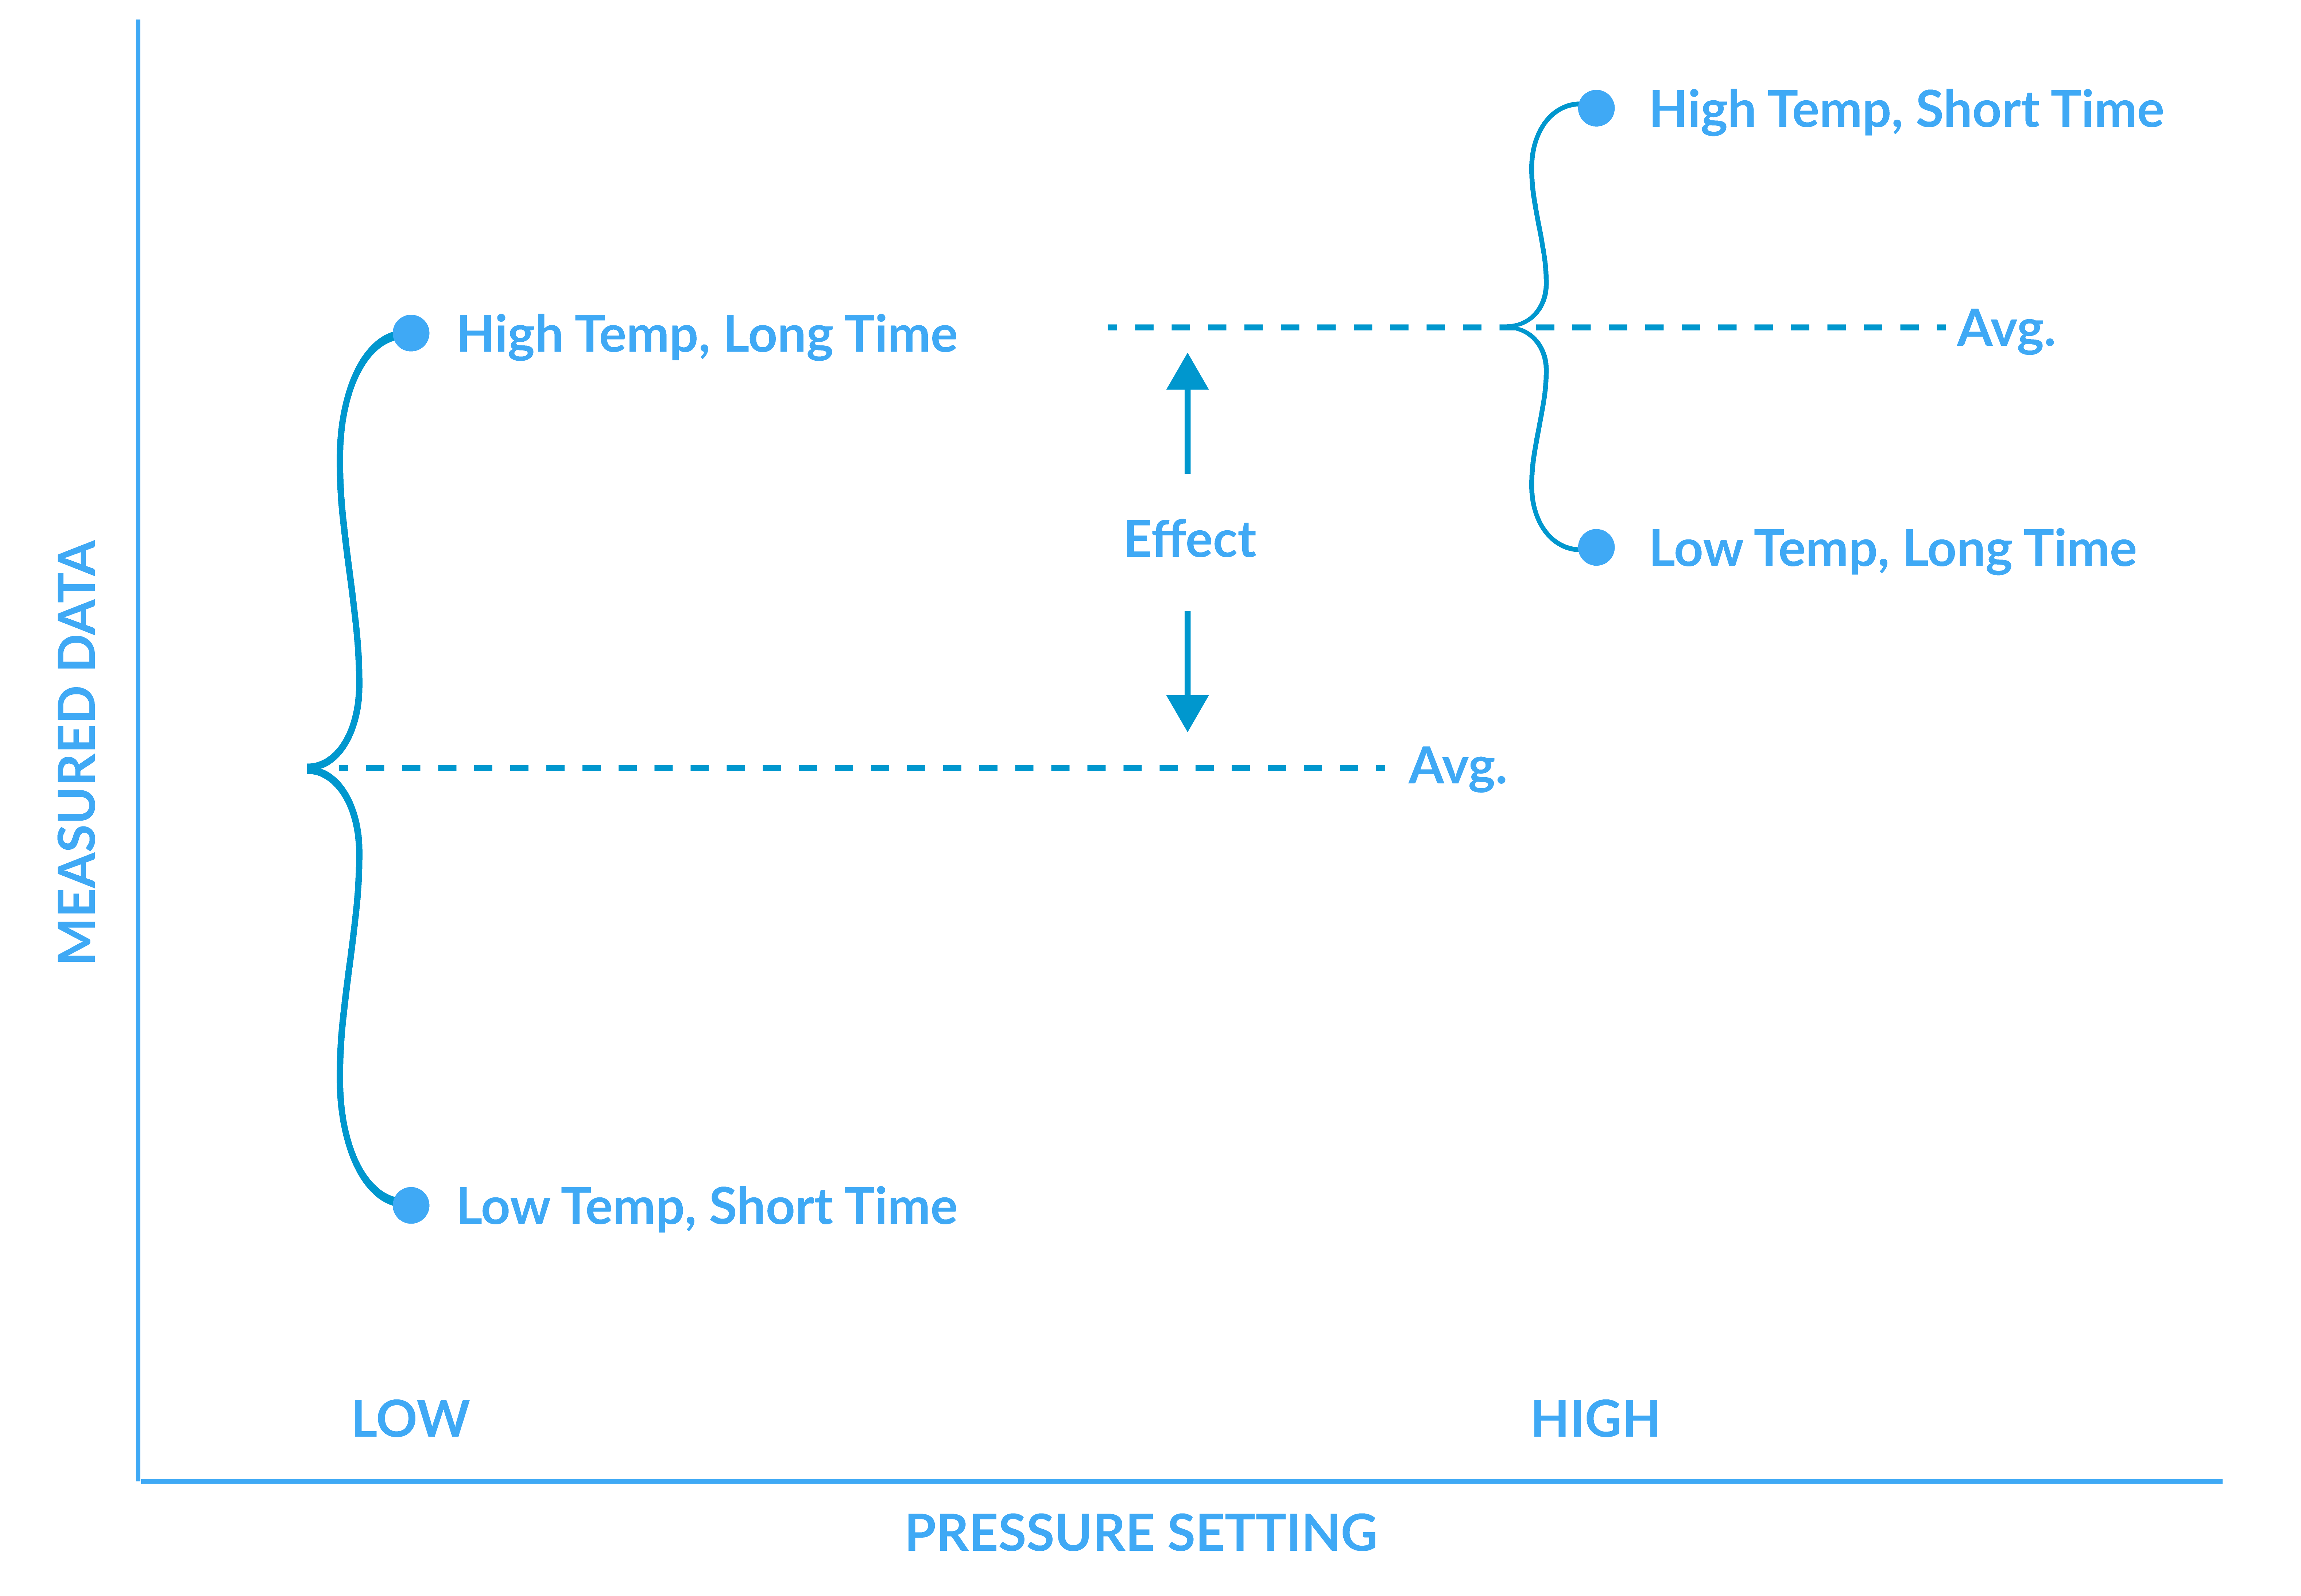 Detail of Measured Data and Pressure Setting Graph.